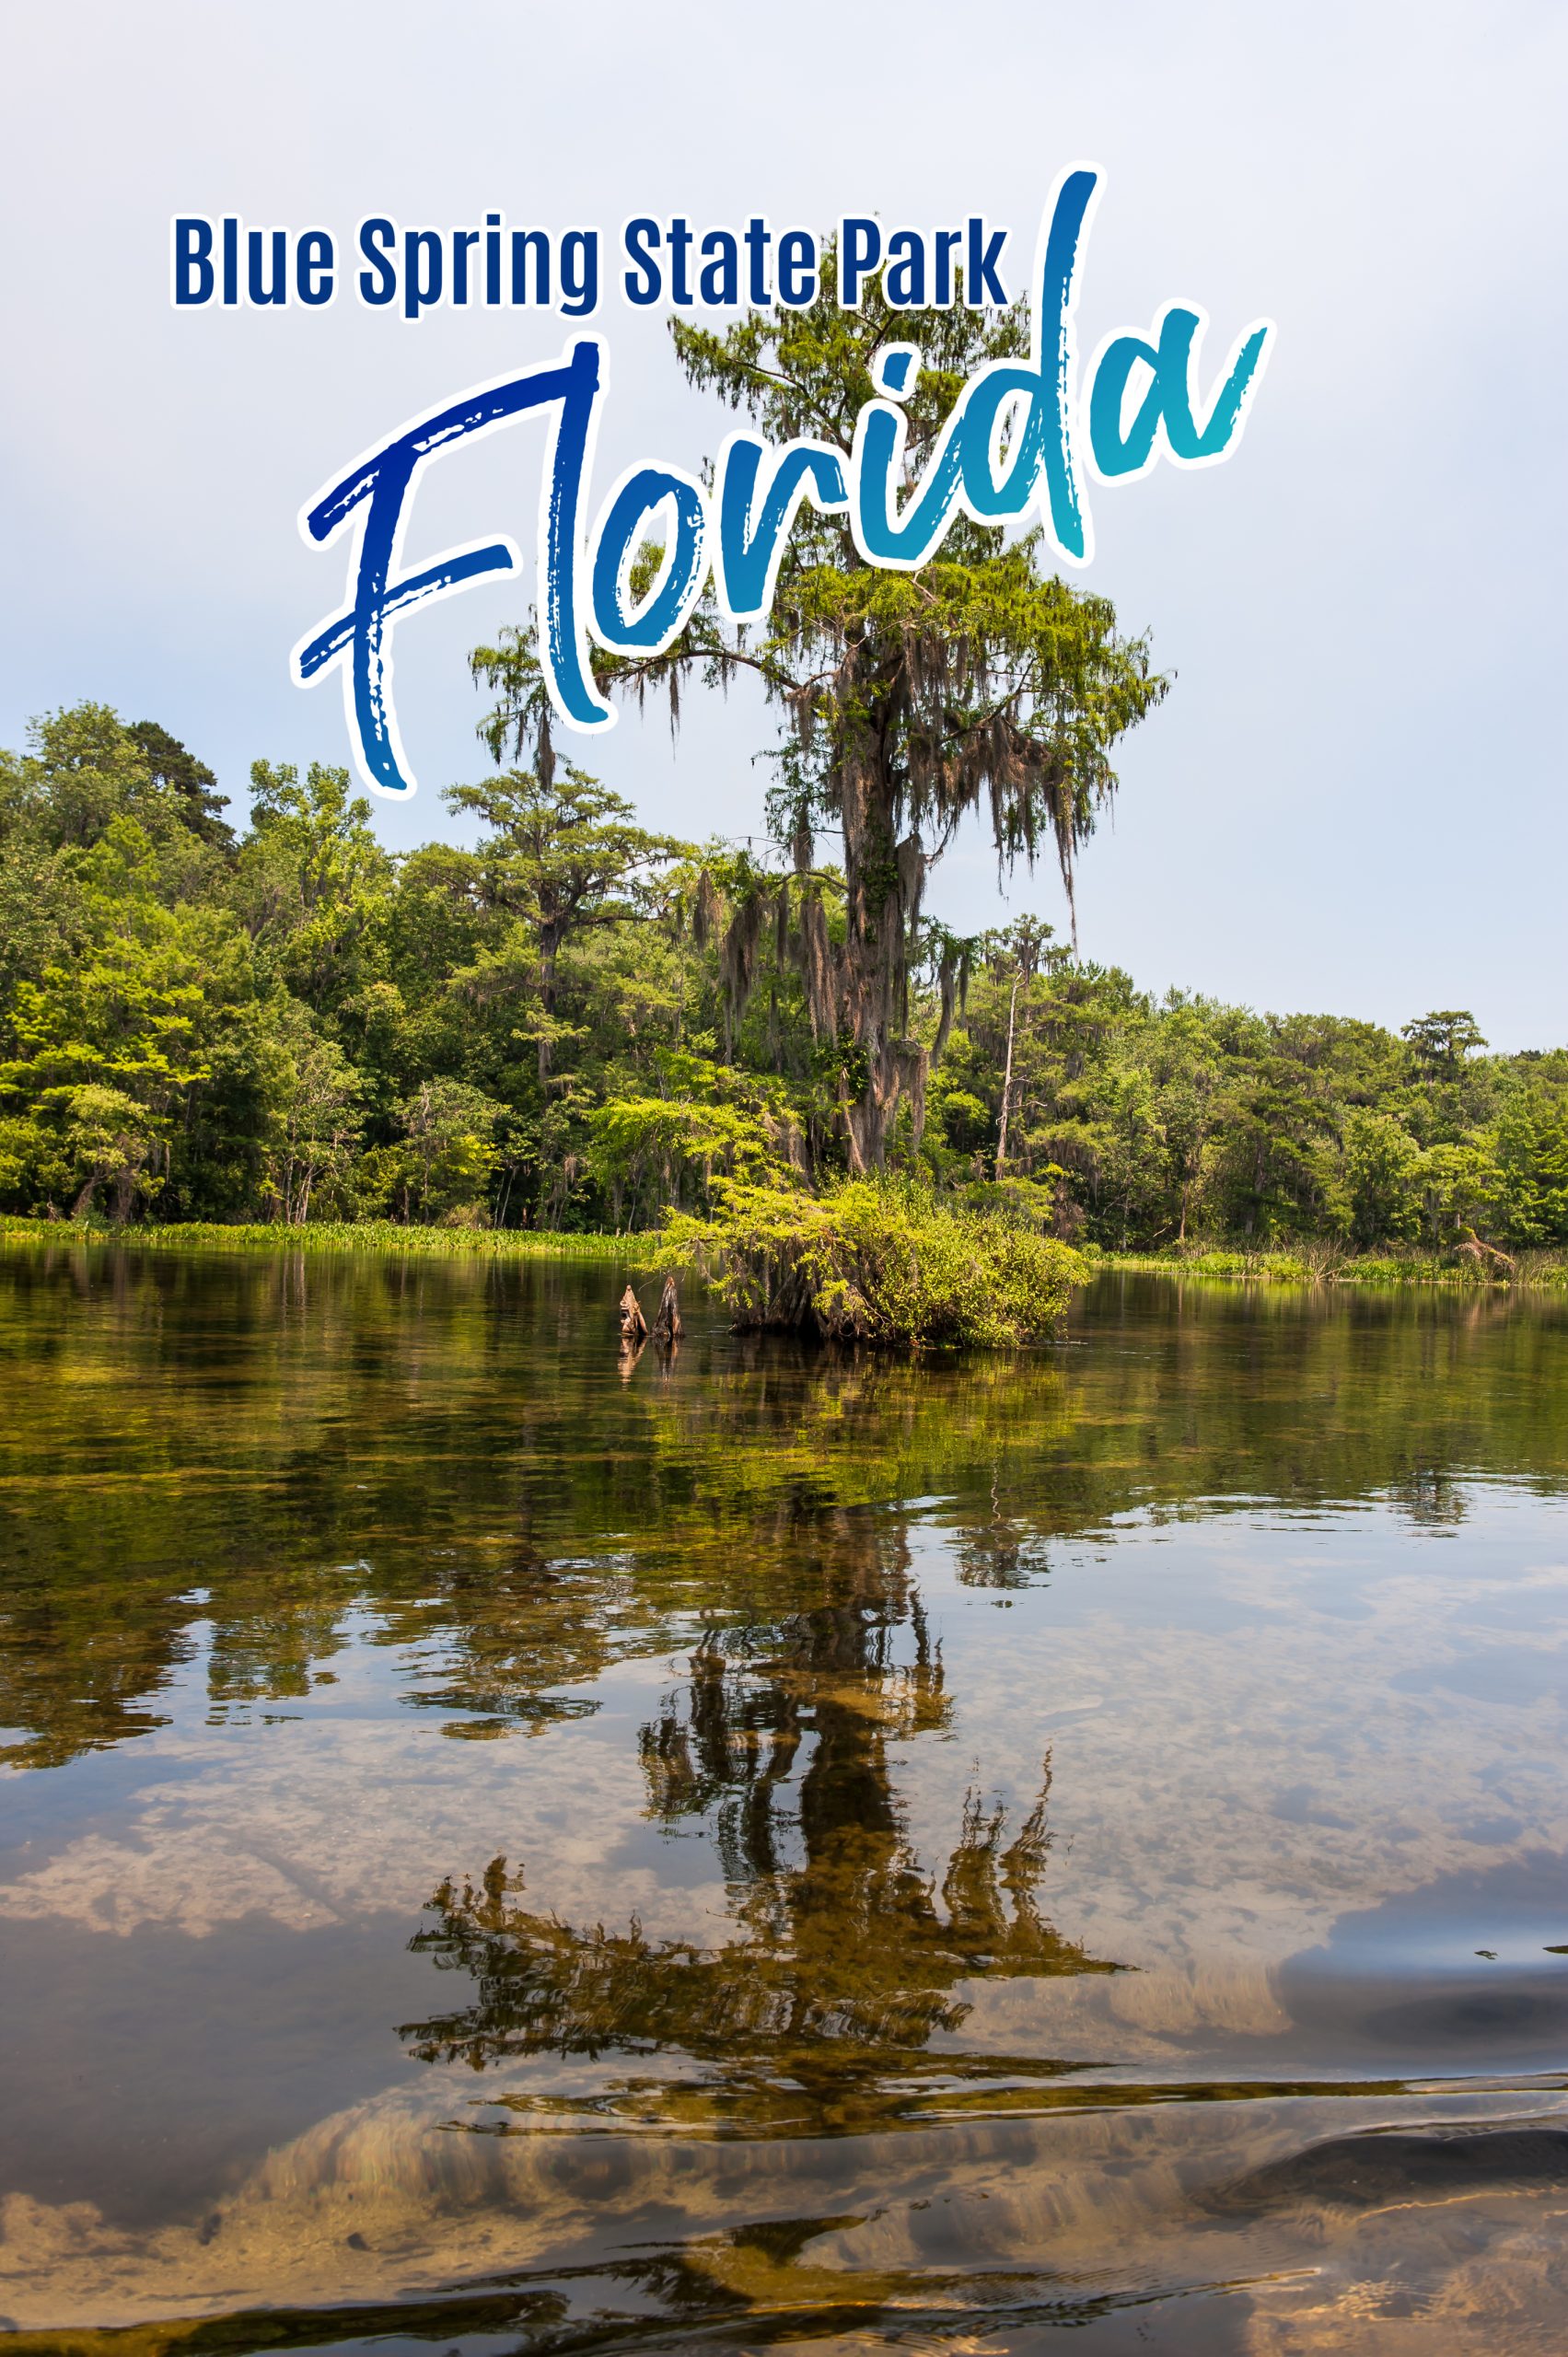 Blue Spring State Park is a picturesque park located in Florida.